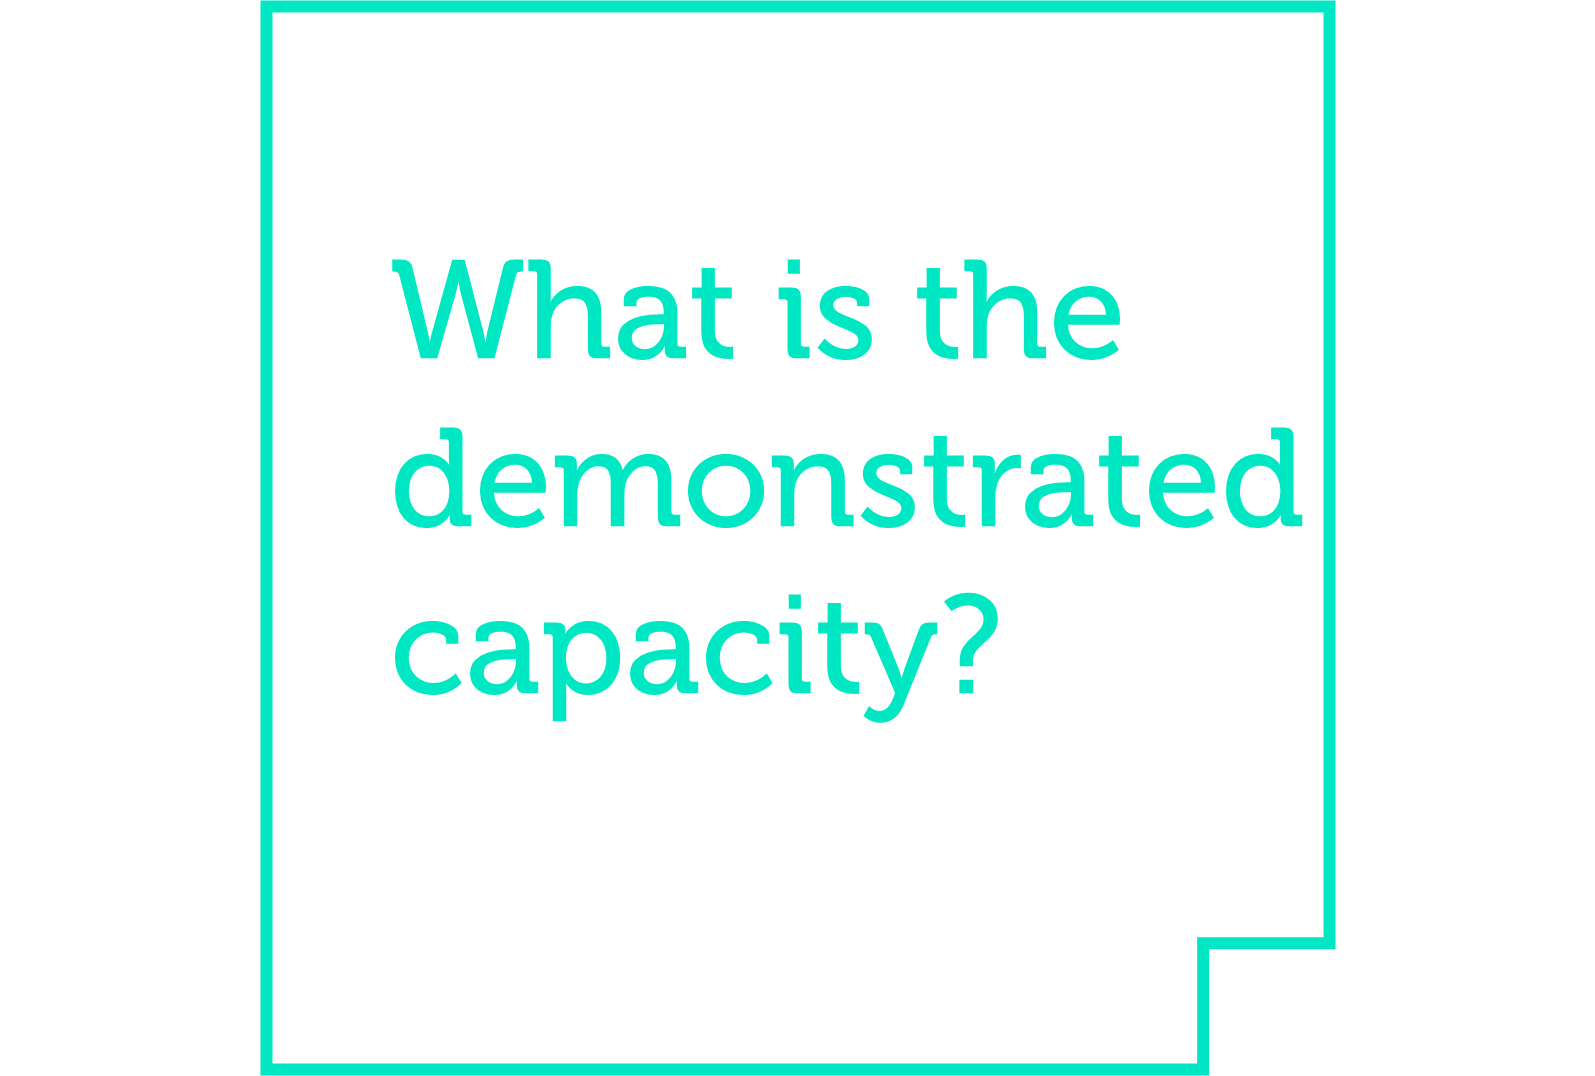 Axon: What is the demonstrated capacity?